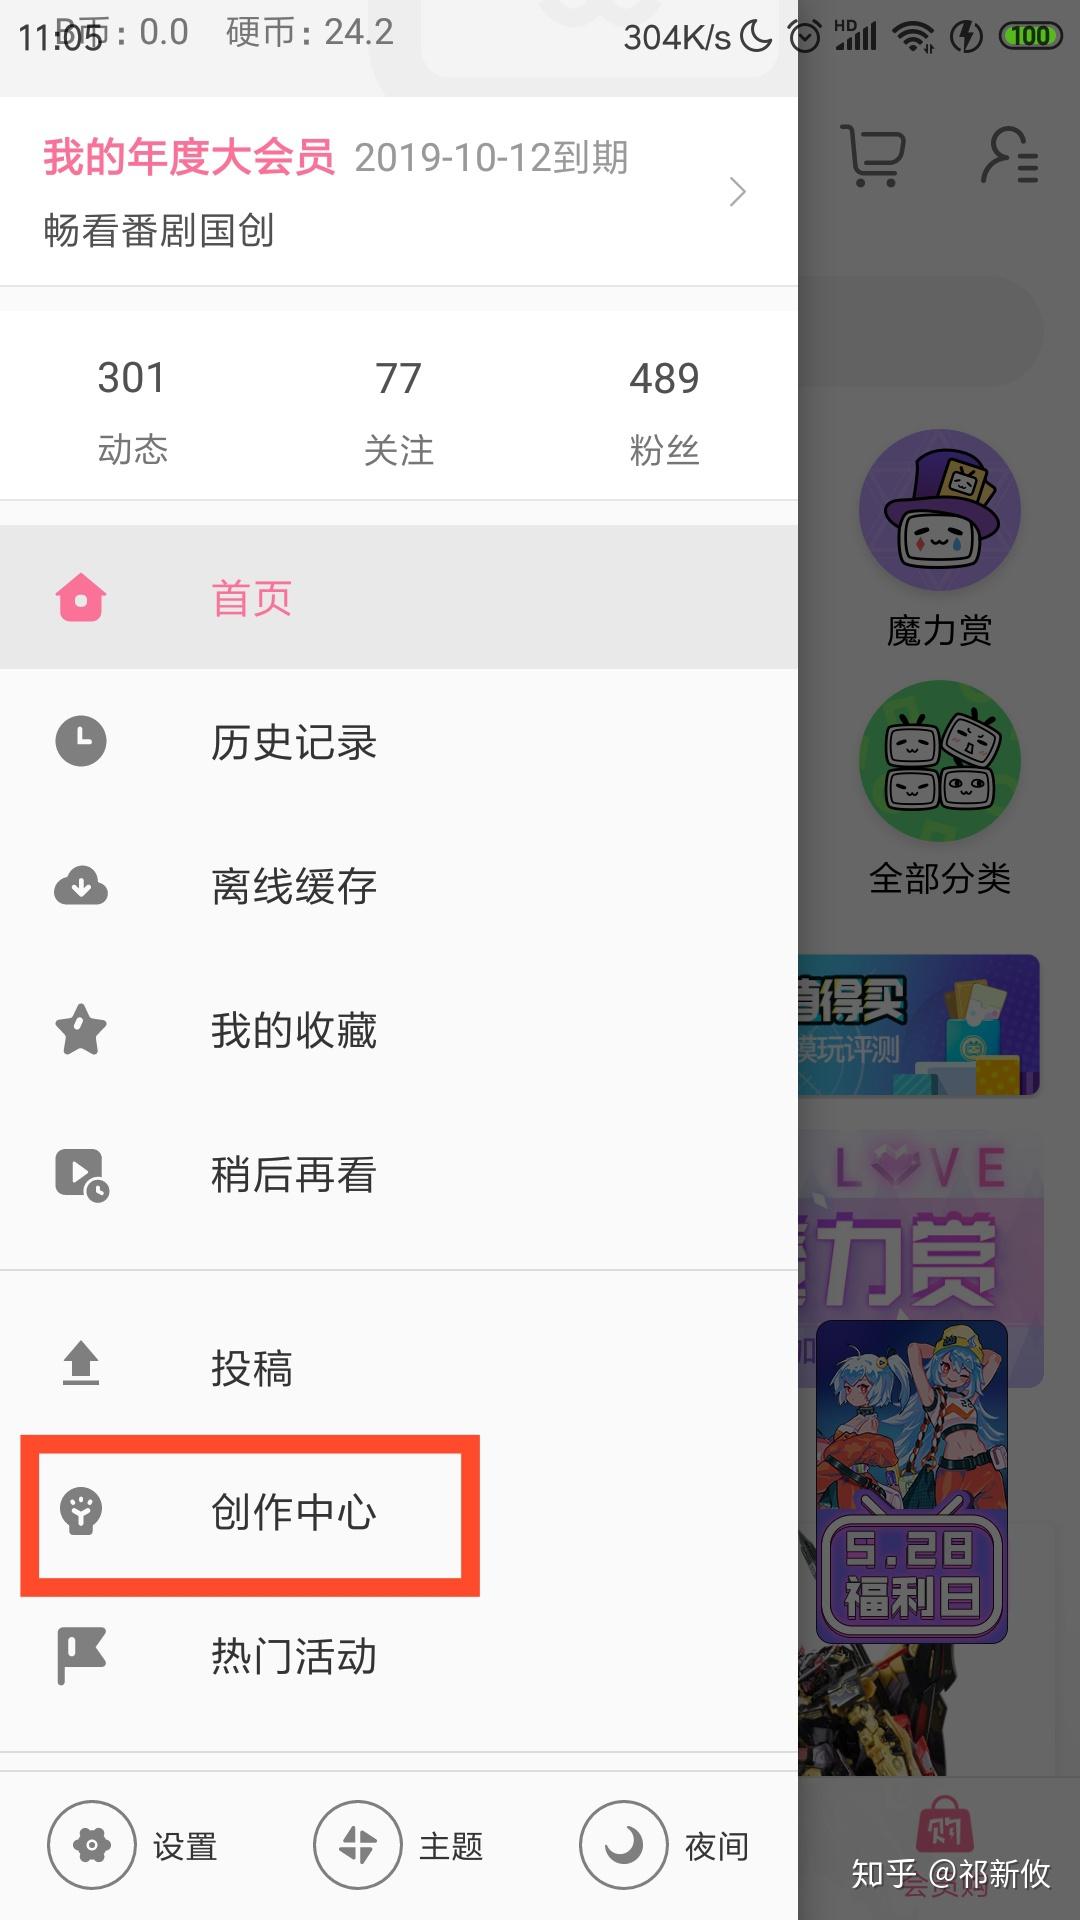 Bilibili Releases Brand Video - Pandaily